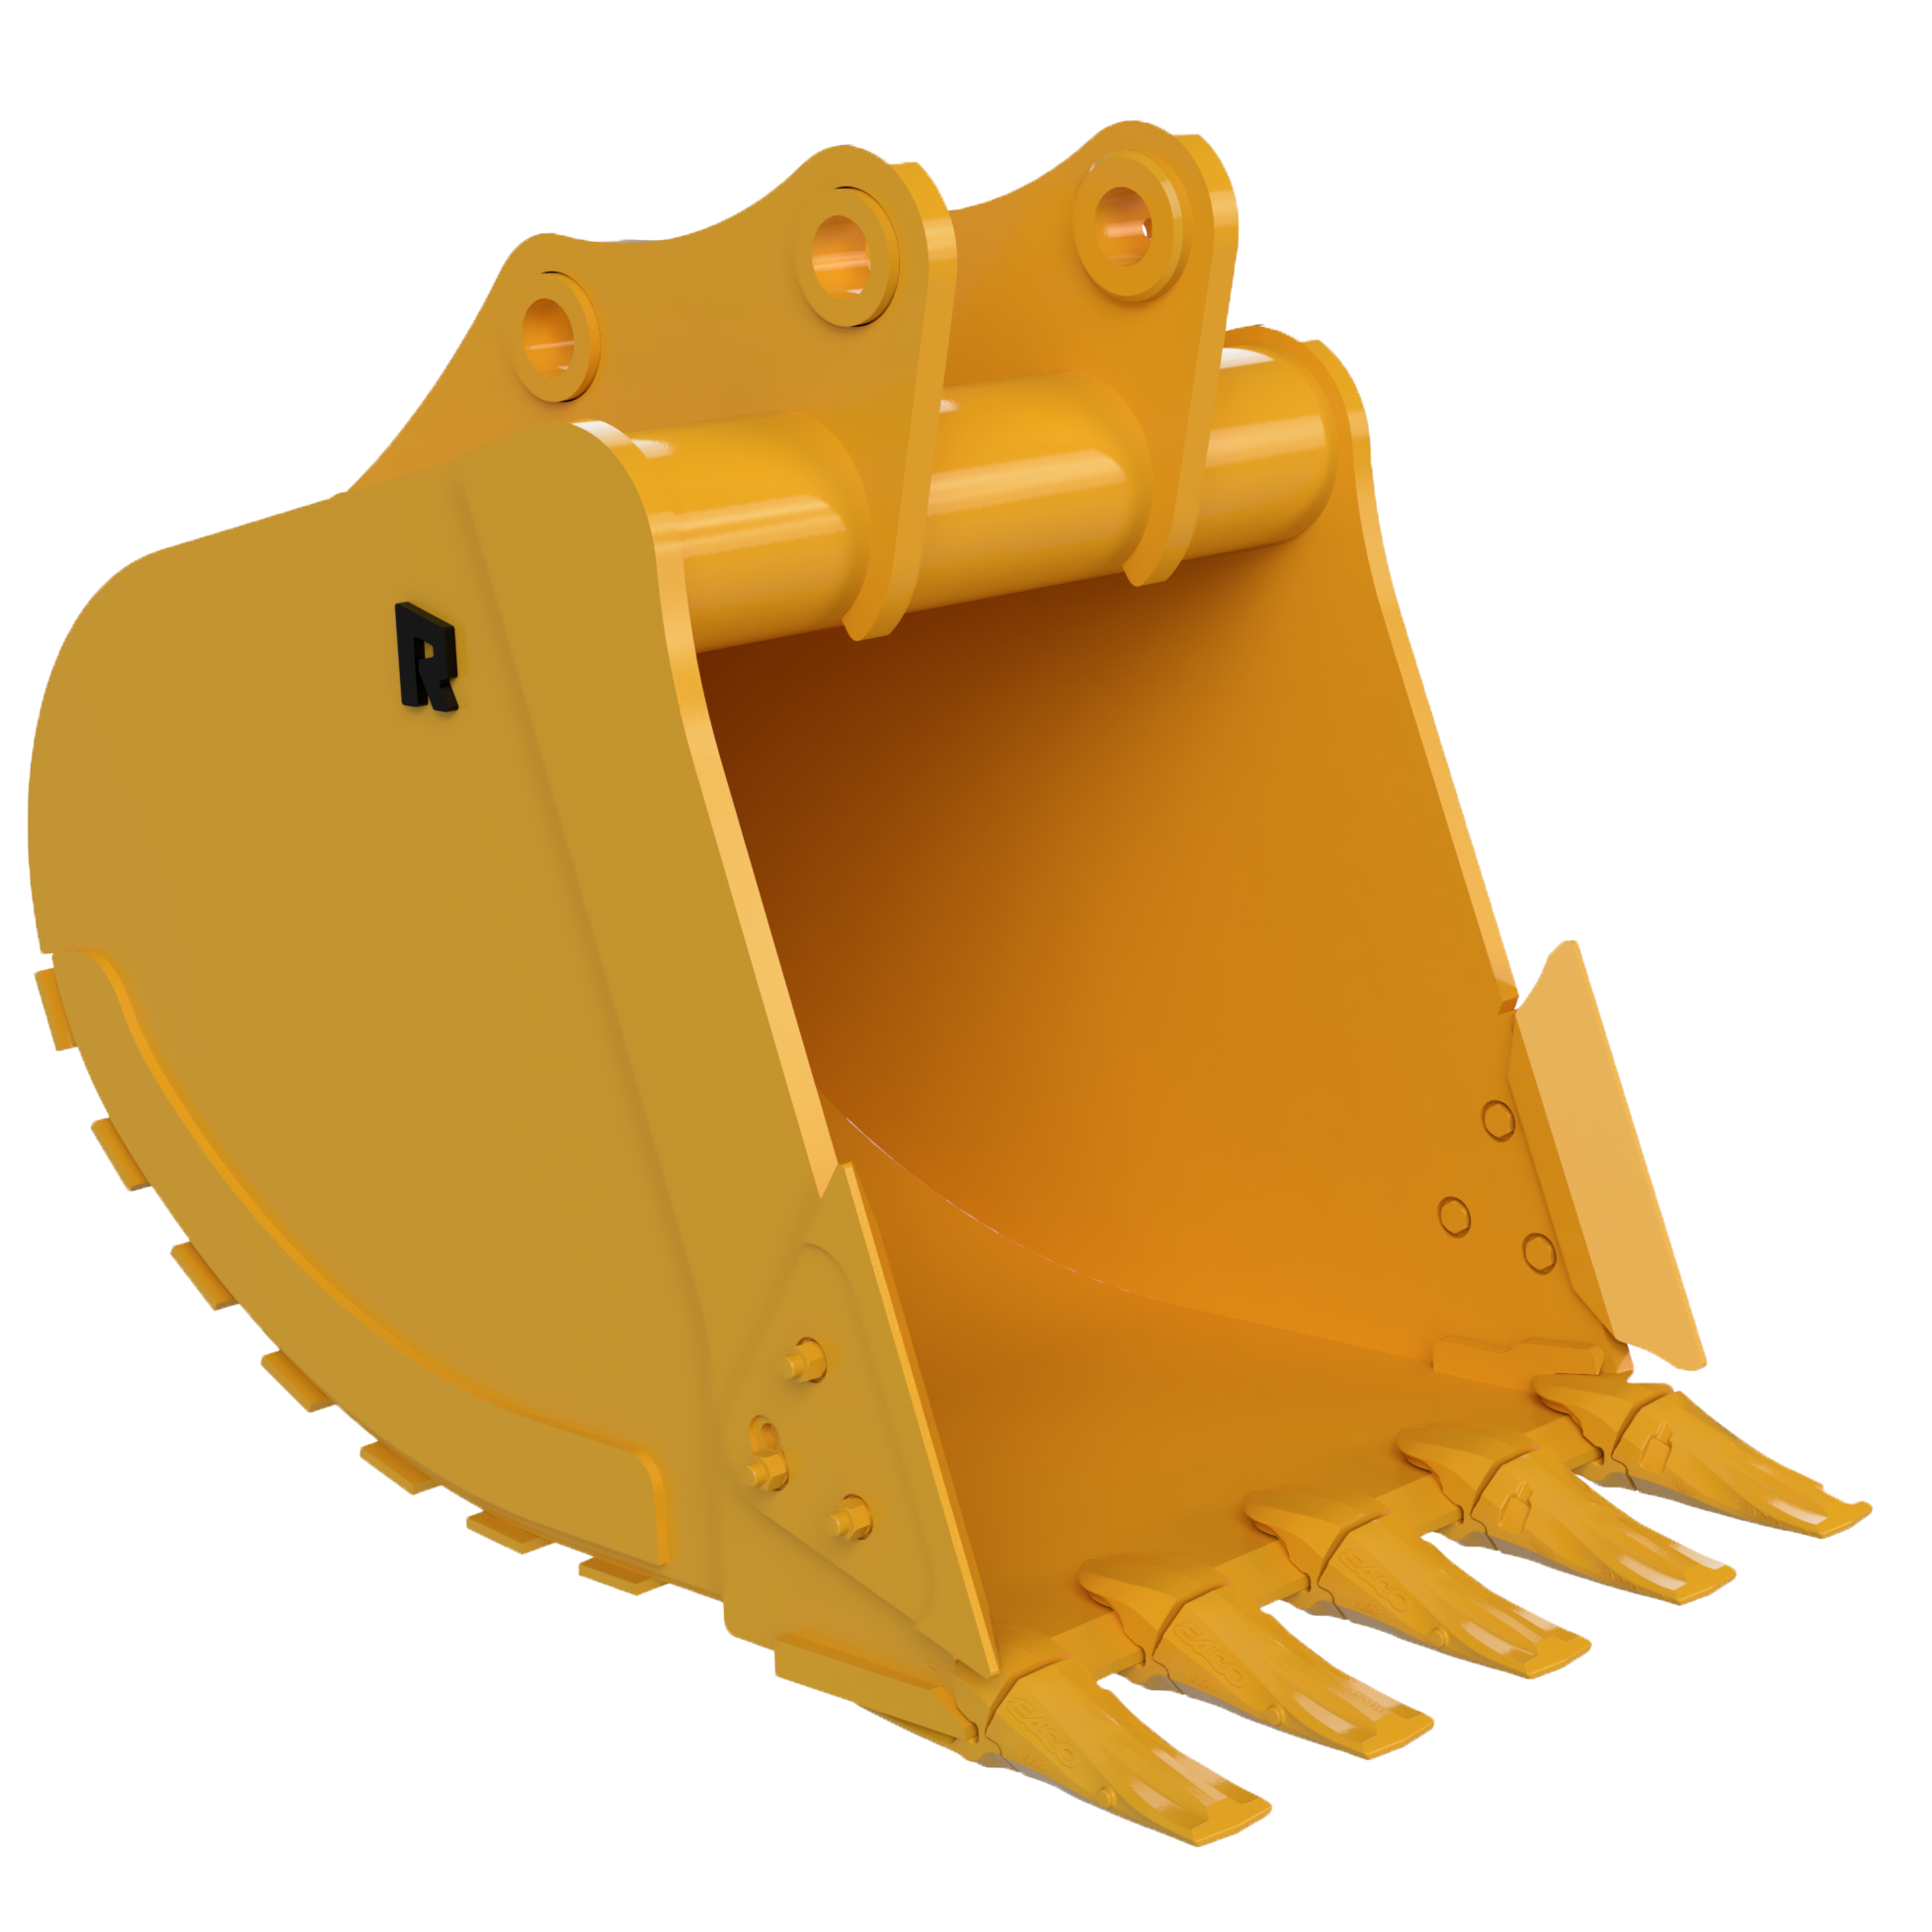 Heavy Duty Excavator Bucket for sale - Rockland Manufacturing